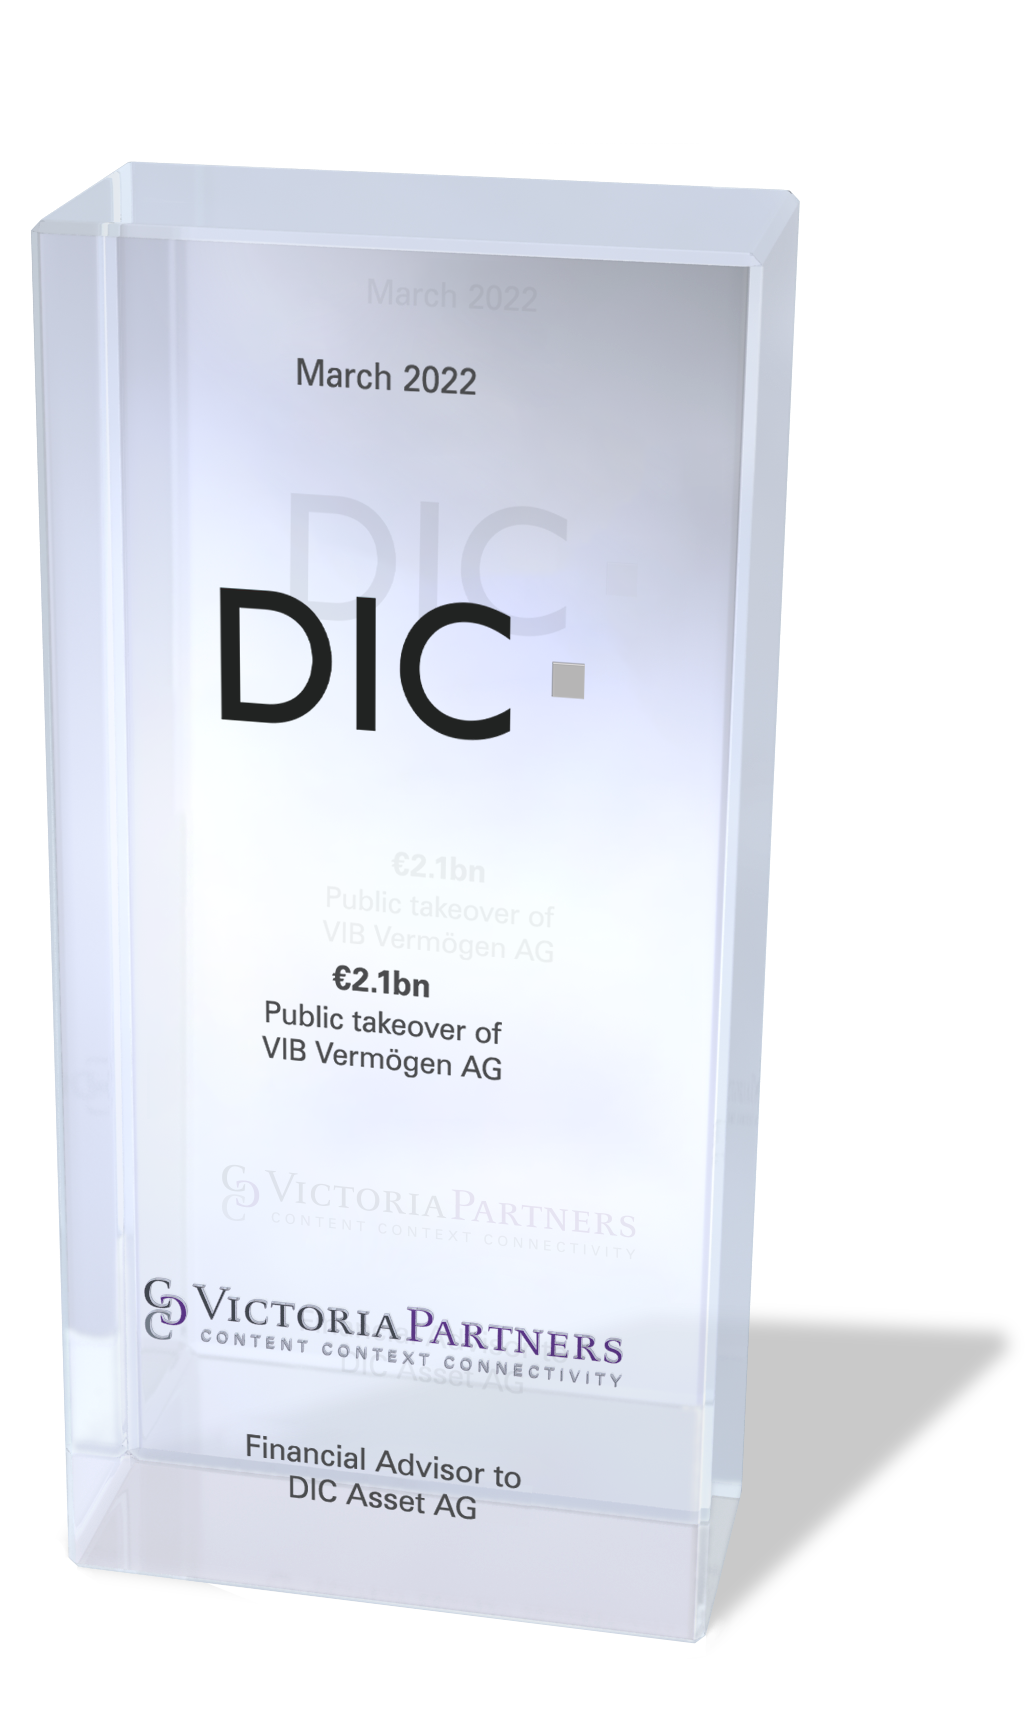 VICTORIAPARTNERS - Financial Advisor to DIC Asset AG - March 2022